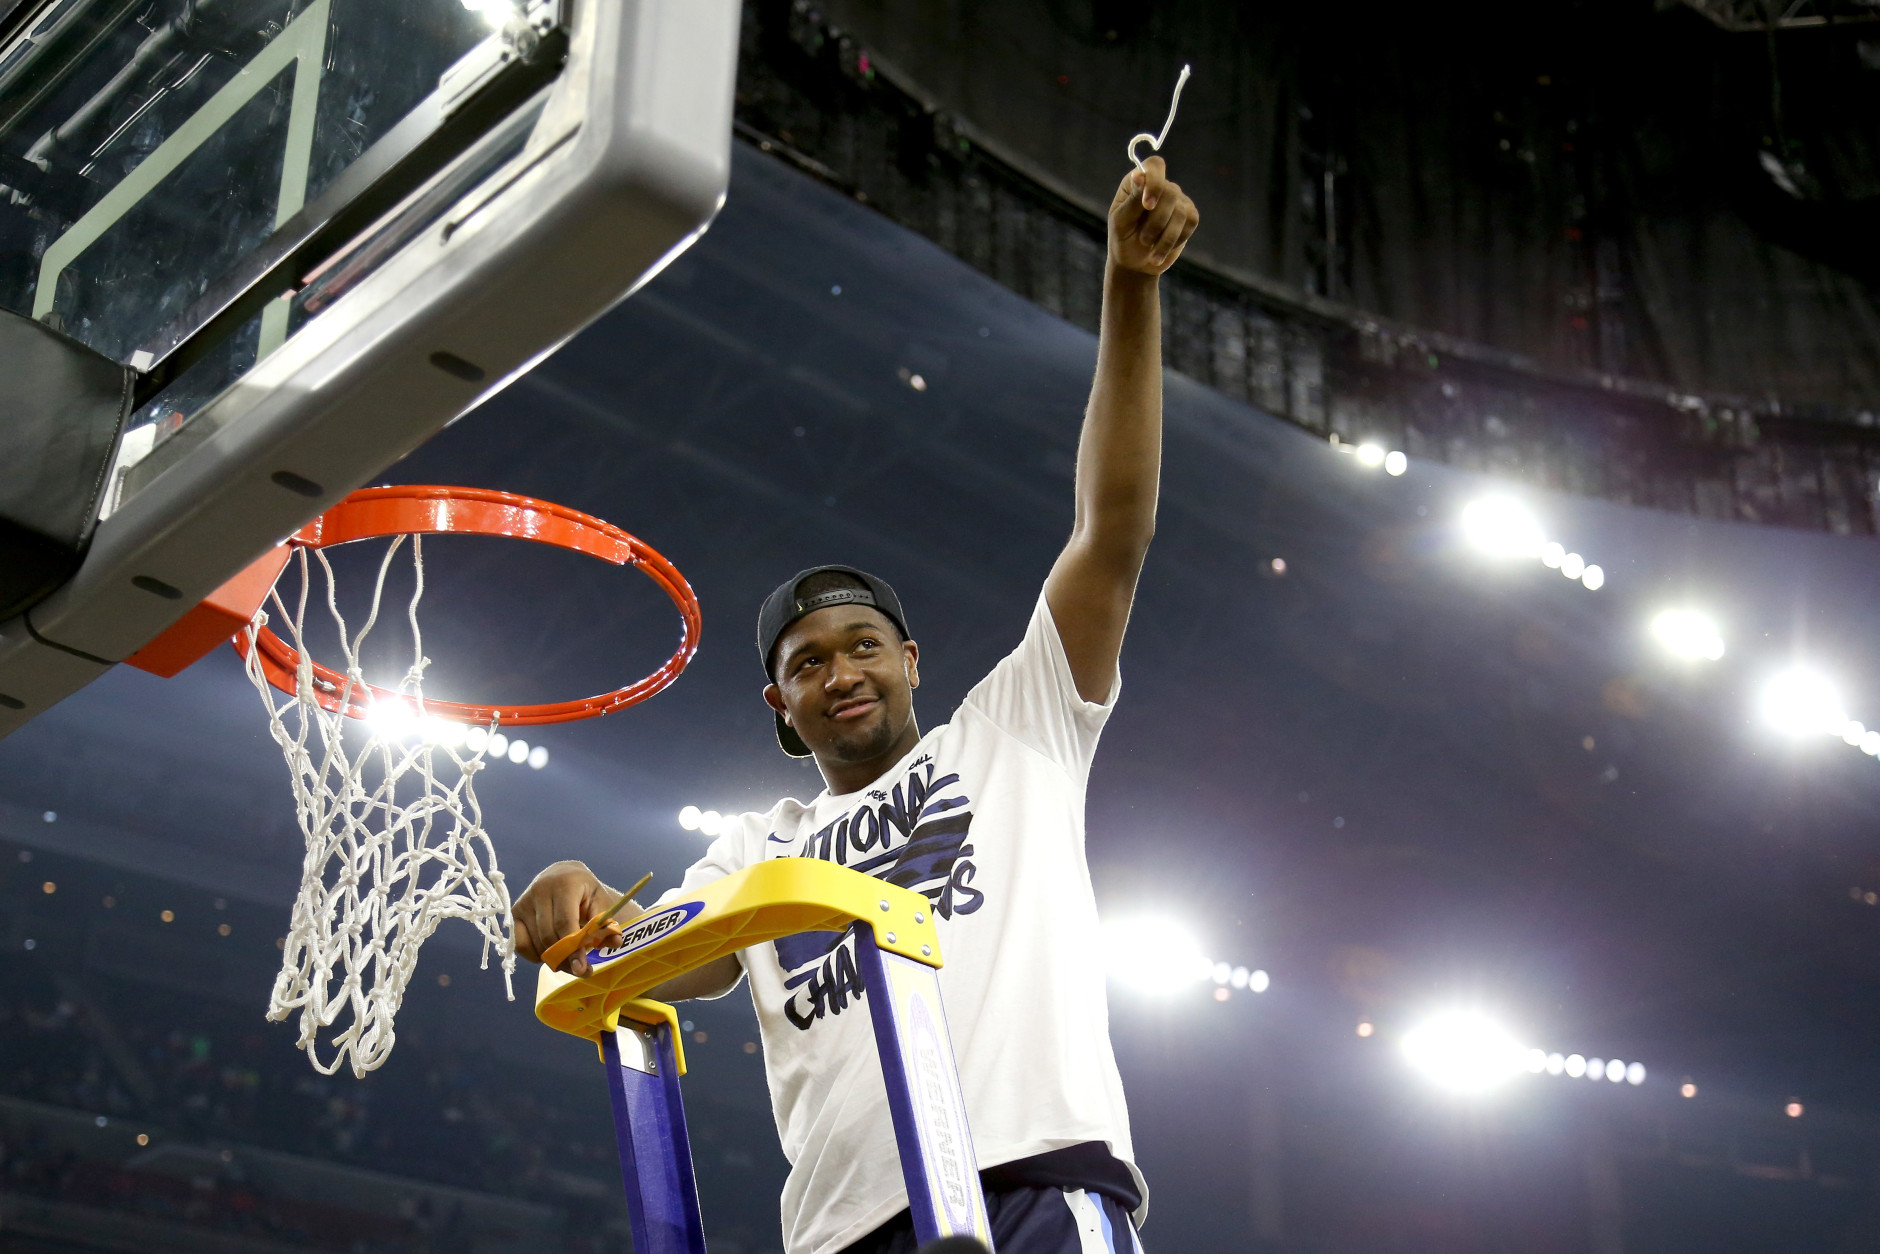 HOUSTON, TEXAS - APRIL 04:  Kris Jenkins #2 of the Villanova Wildcats cuts the net after defeating the North Carolina Tar Heels 77-74 to win the 2016 NCAA Men's Final Four National Championship game at NRG Stadium on April 4, 2016 in Houston, Texas.  (Photo by Streeter Lecka/Getty Images)